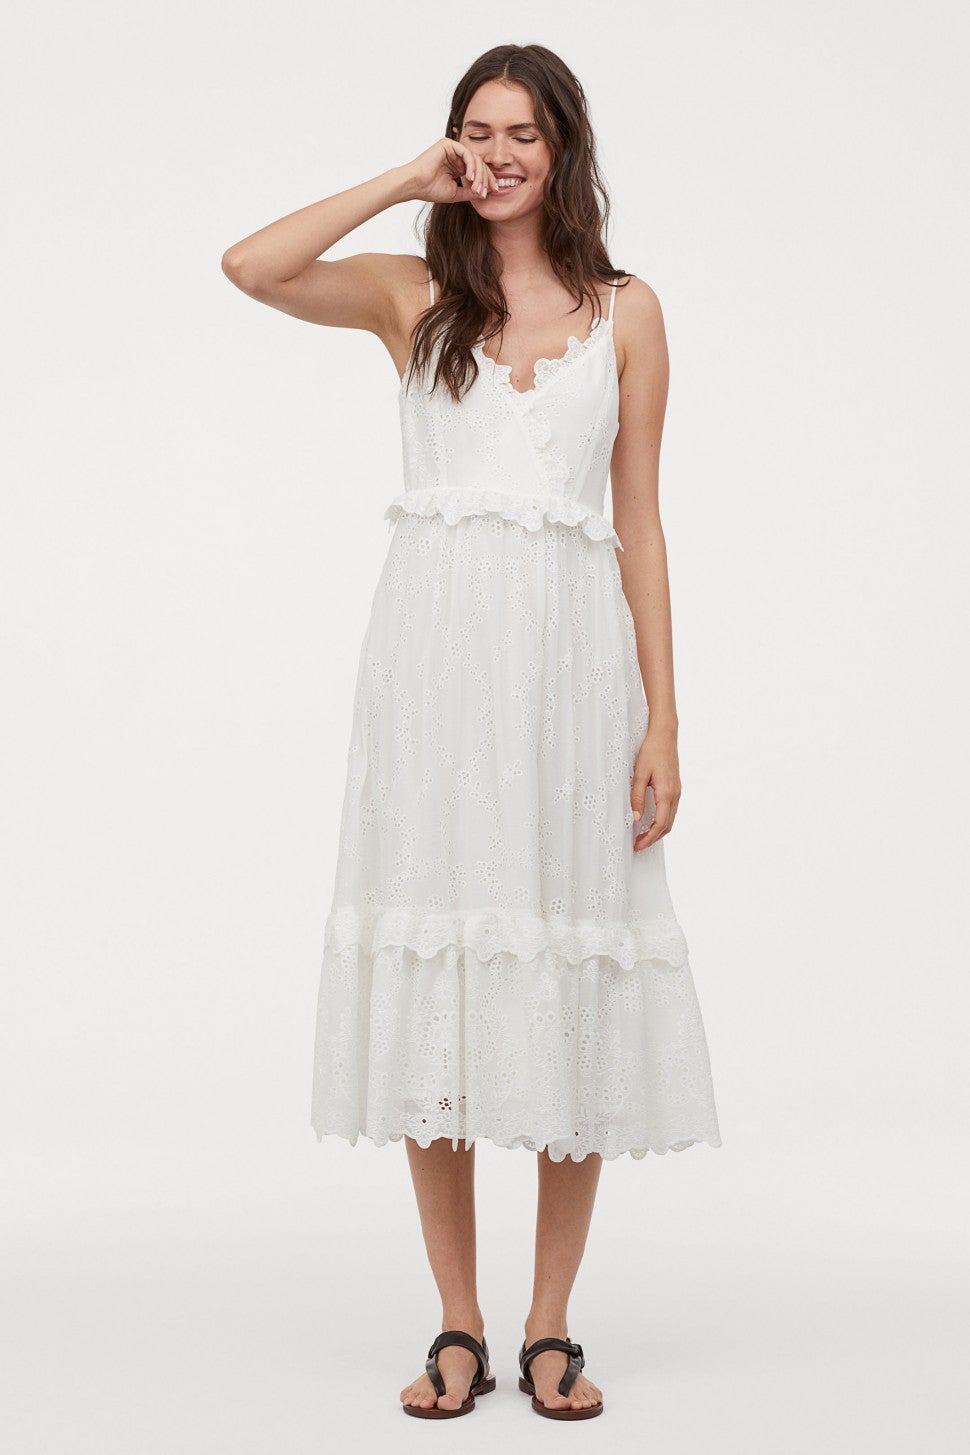 H&M embroidered ruffled dress